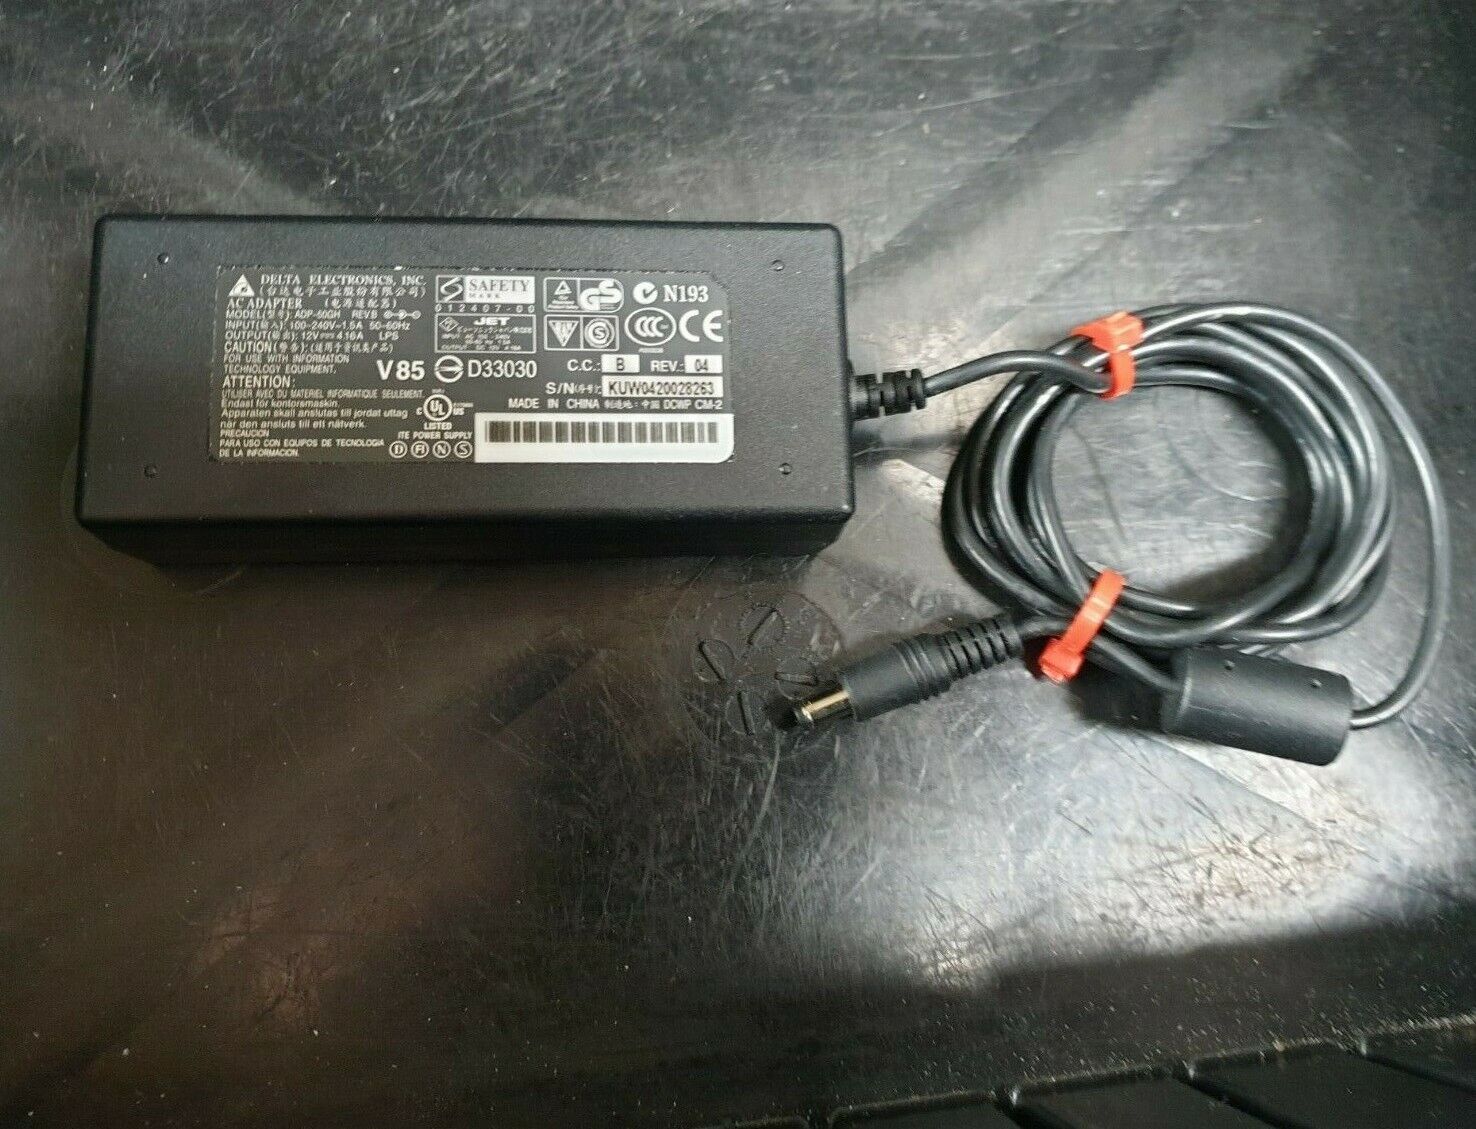 *Brand NEW* DELTA ELECTRONICS ADP-50GH B 12V 4.16A AC ADAPTER (R4S13.1B2)POWER Supply